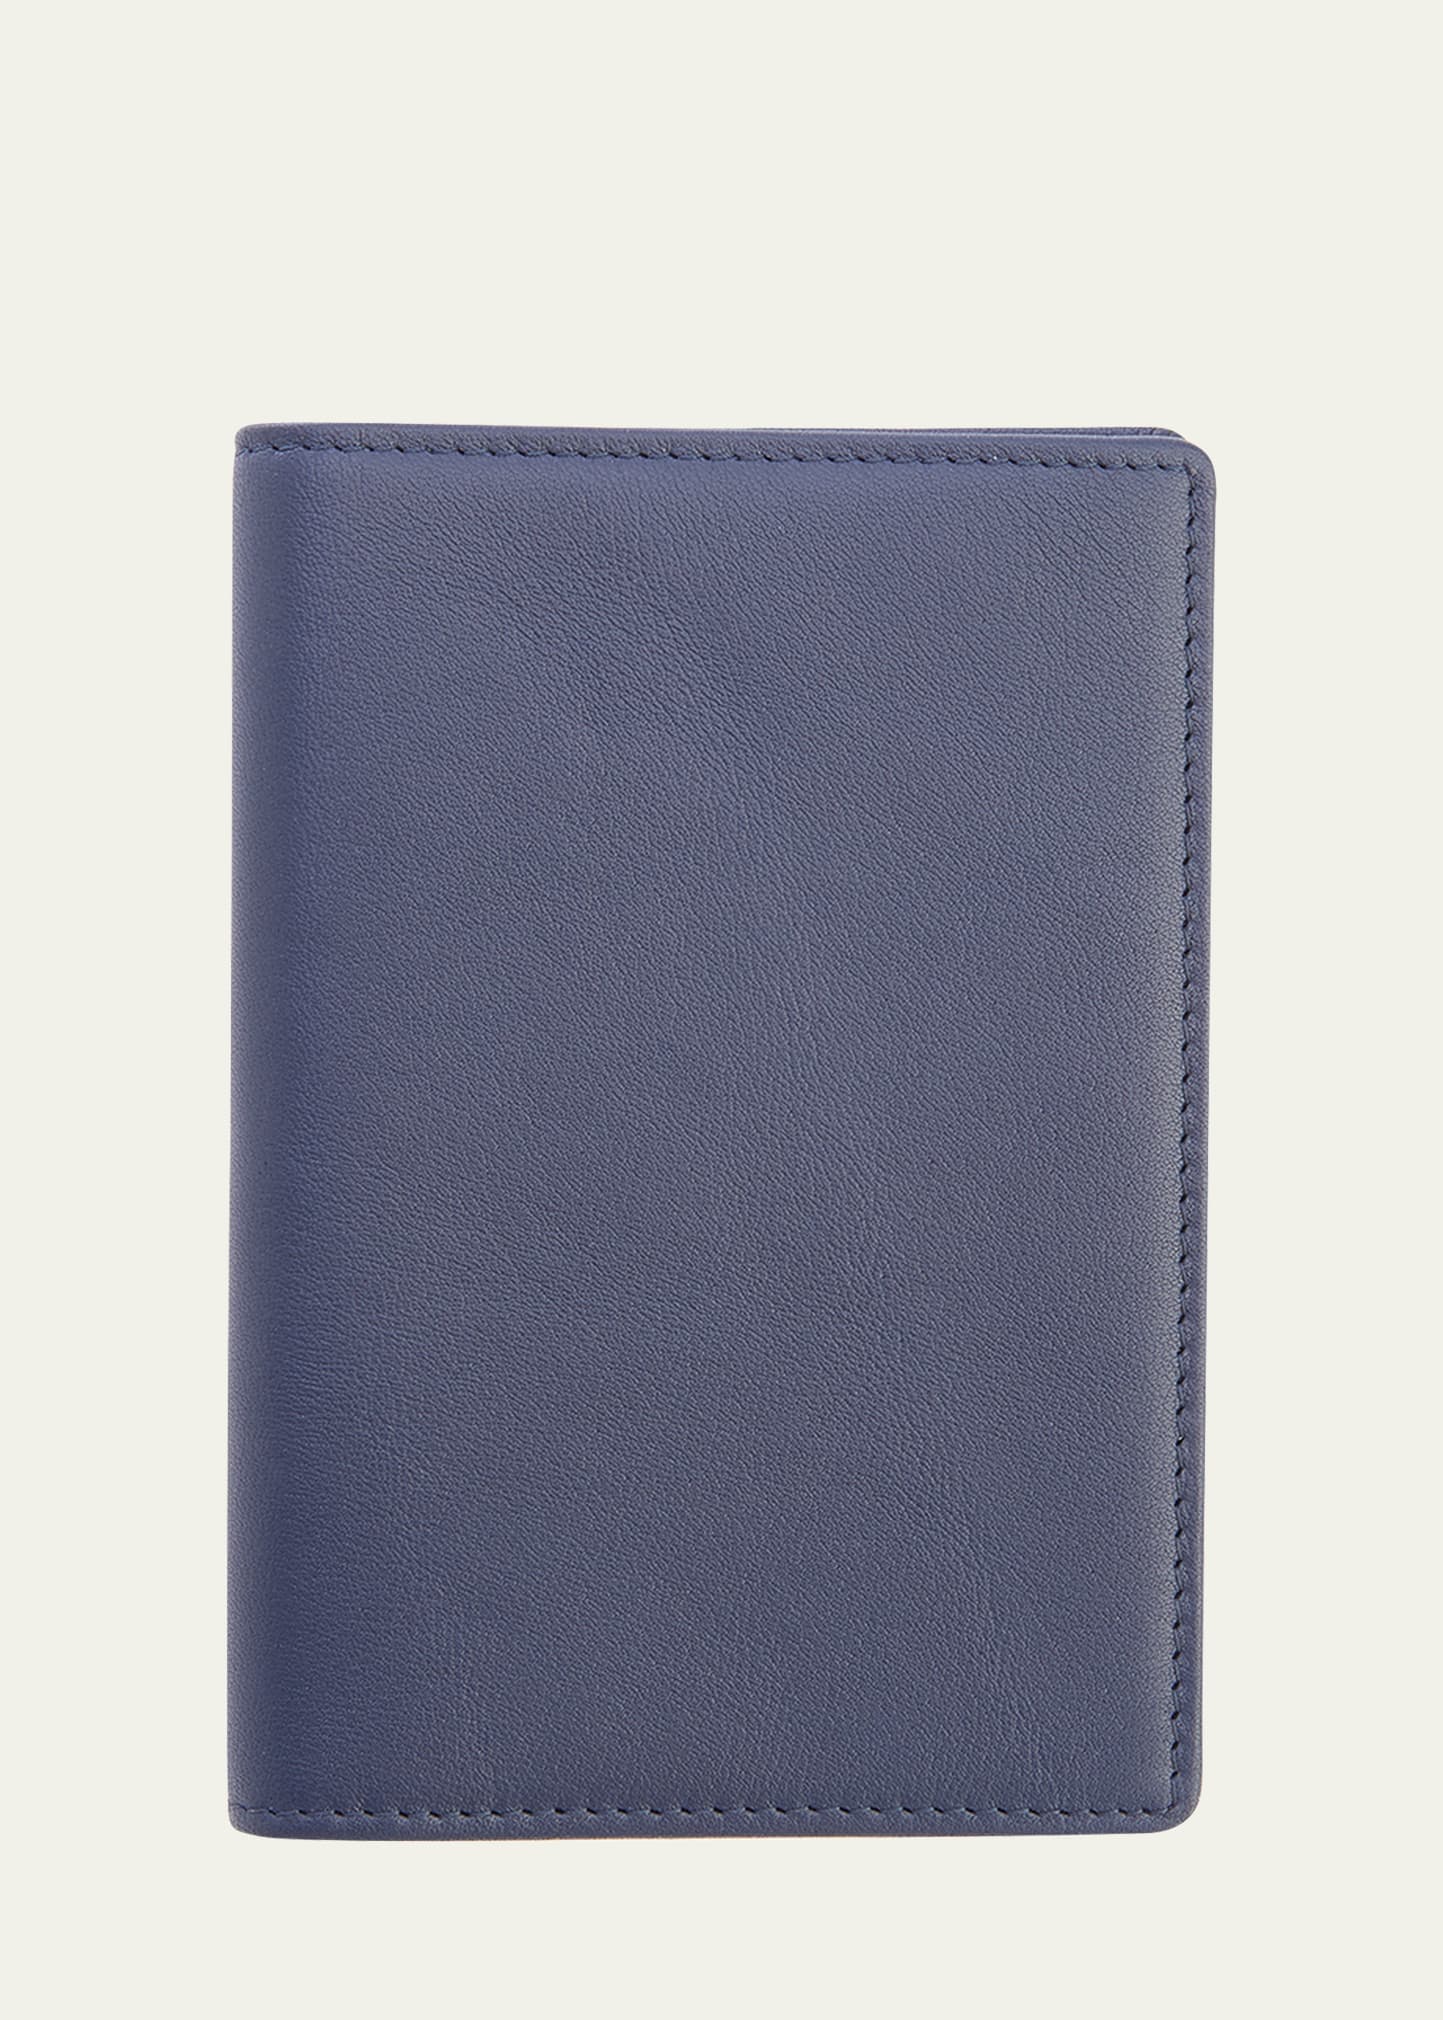 ROYCE New York Personalized Leather RFID-Blocking Passport Wallet with Vaccine Card Pocket